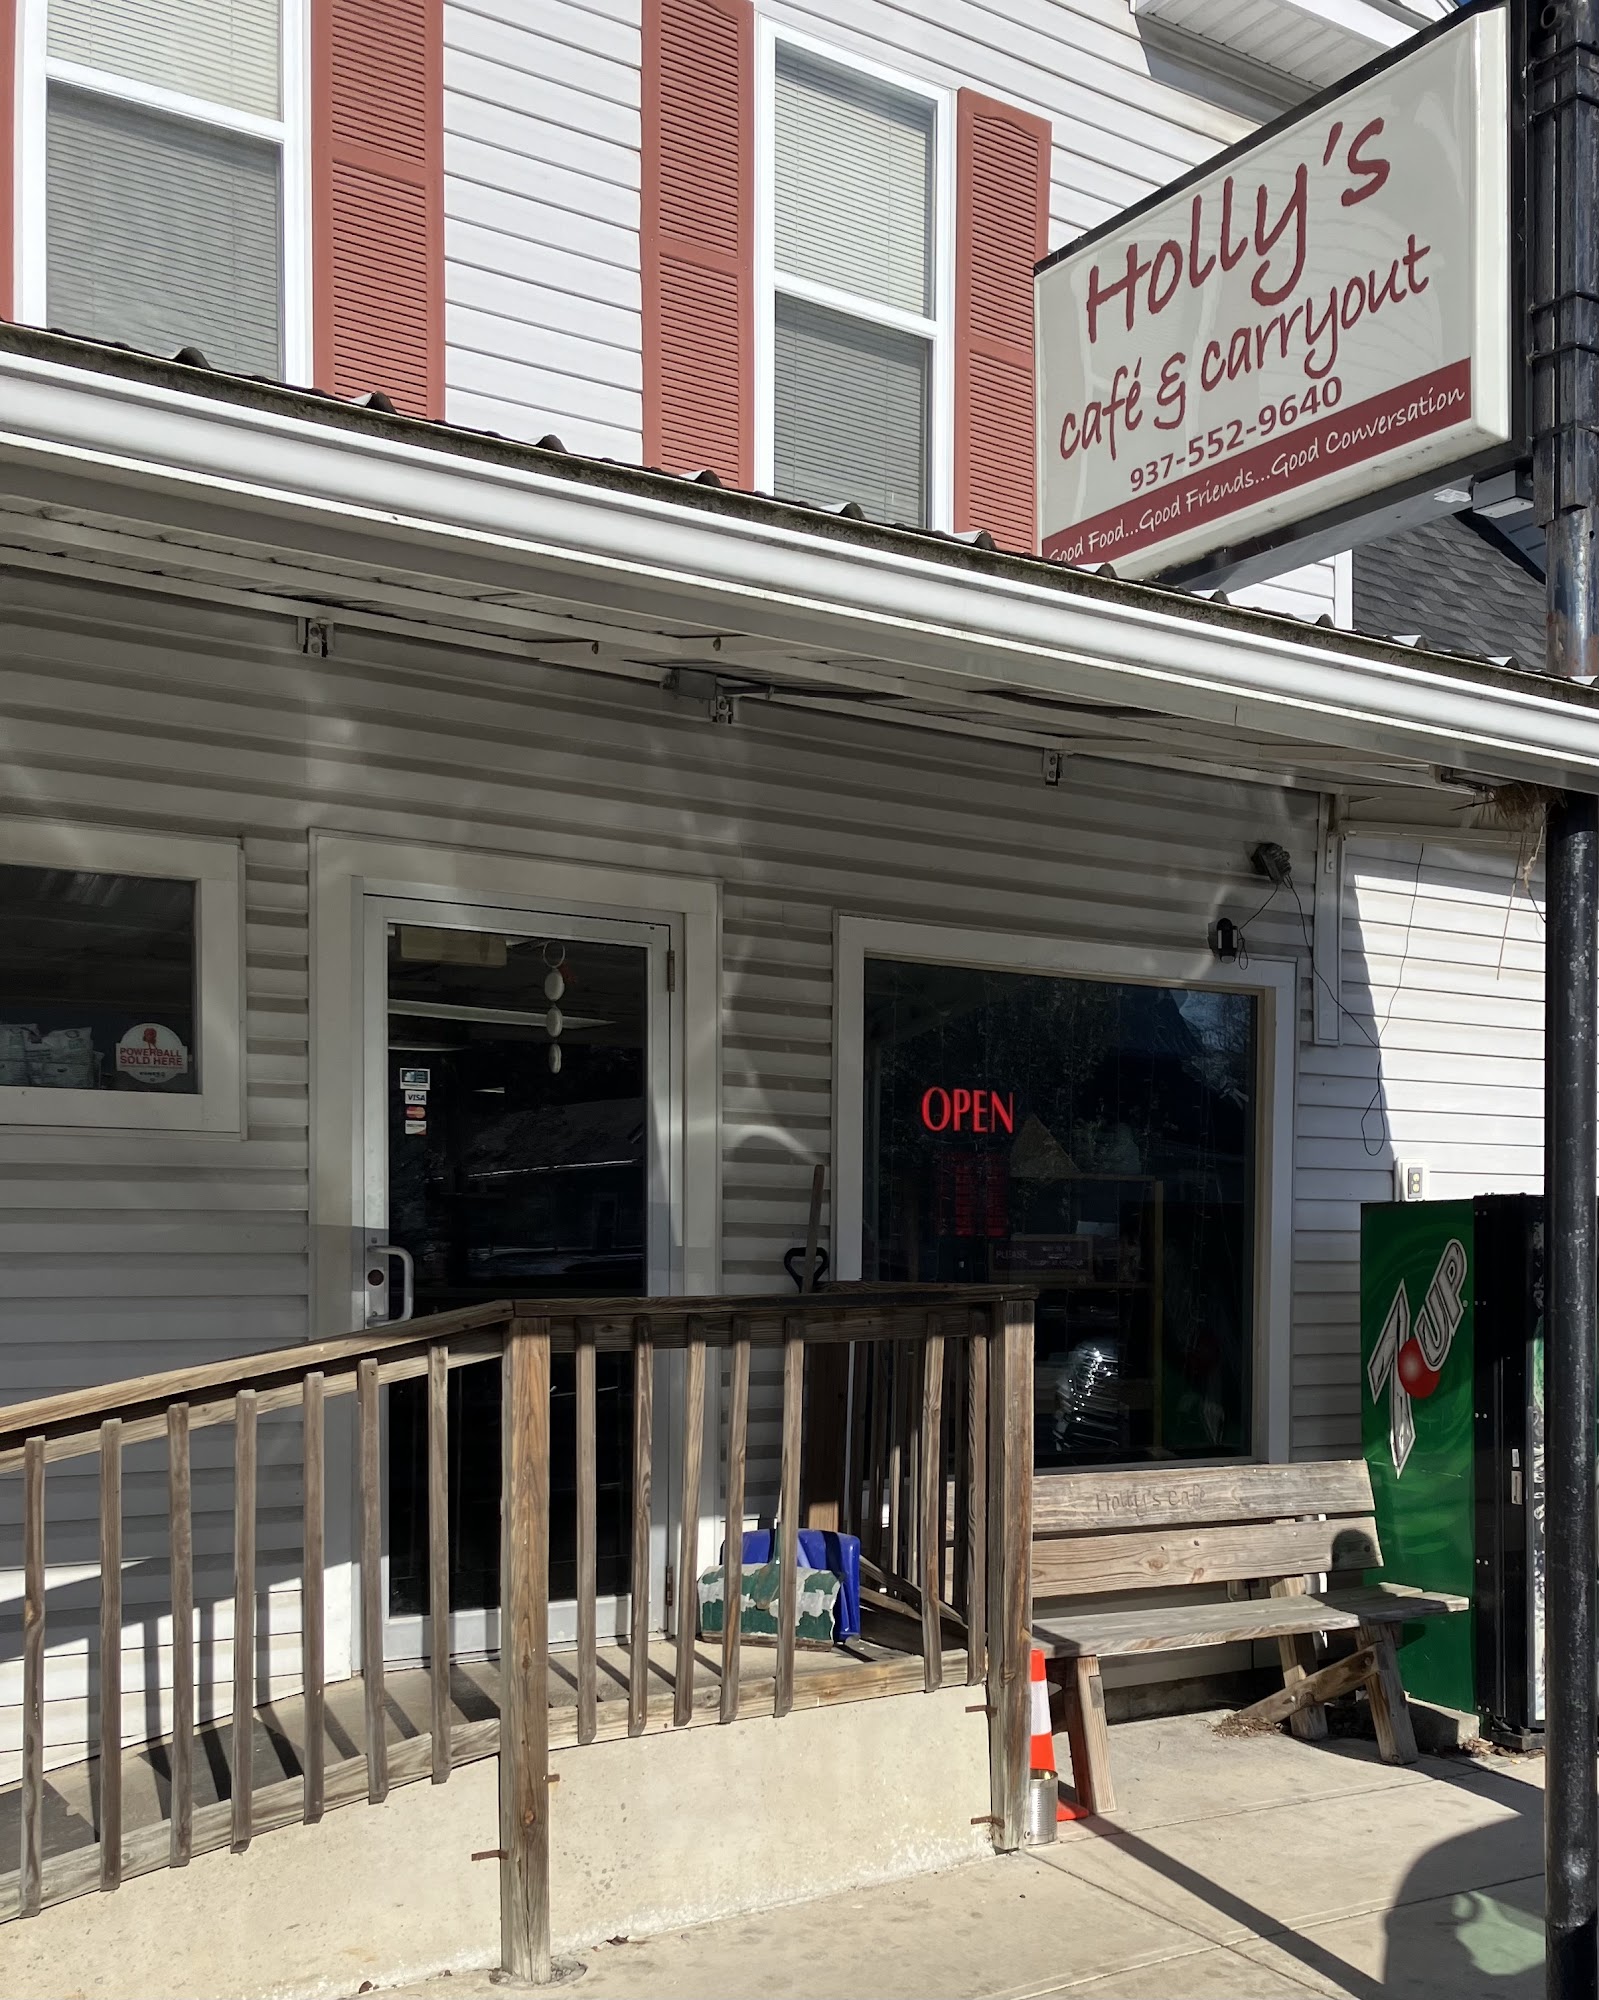 Holly's Cafe & Carryout